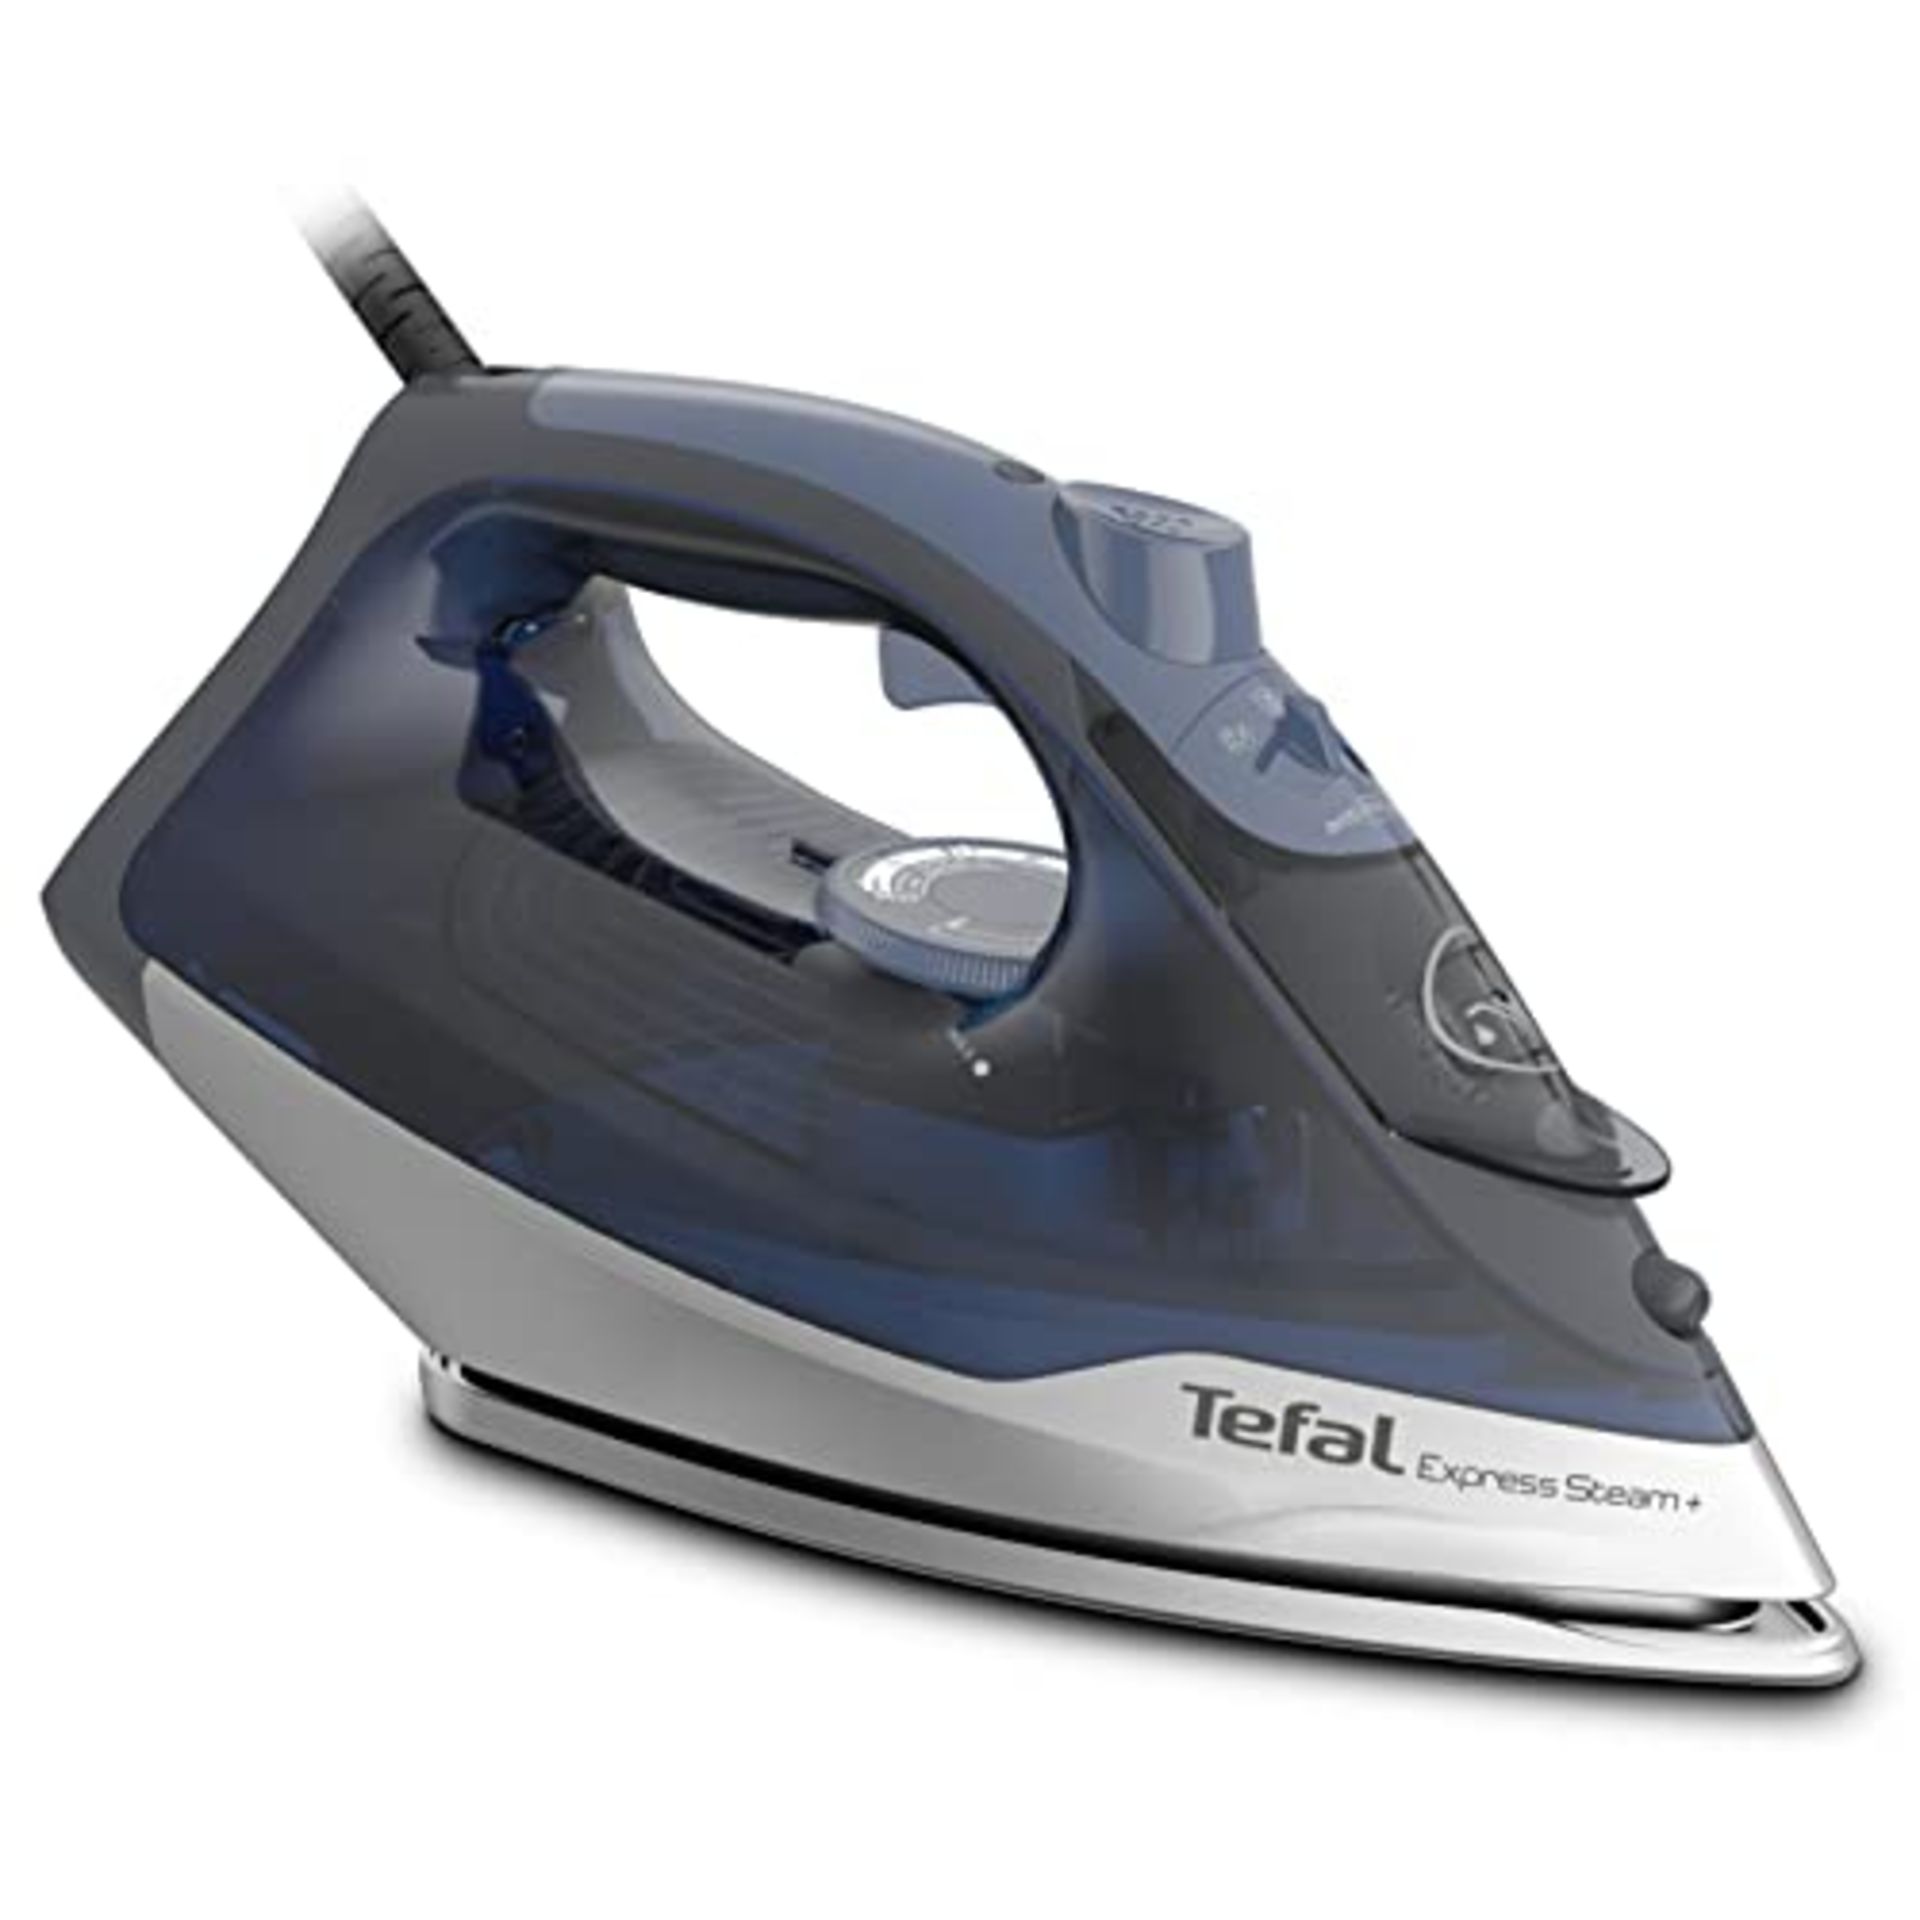 Tefal Steam Iron, Express Steam, 2600 watts, Blue and Grey, FV2882, 0.27L